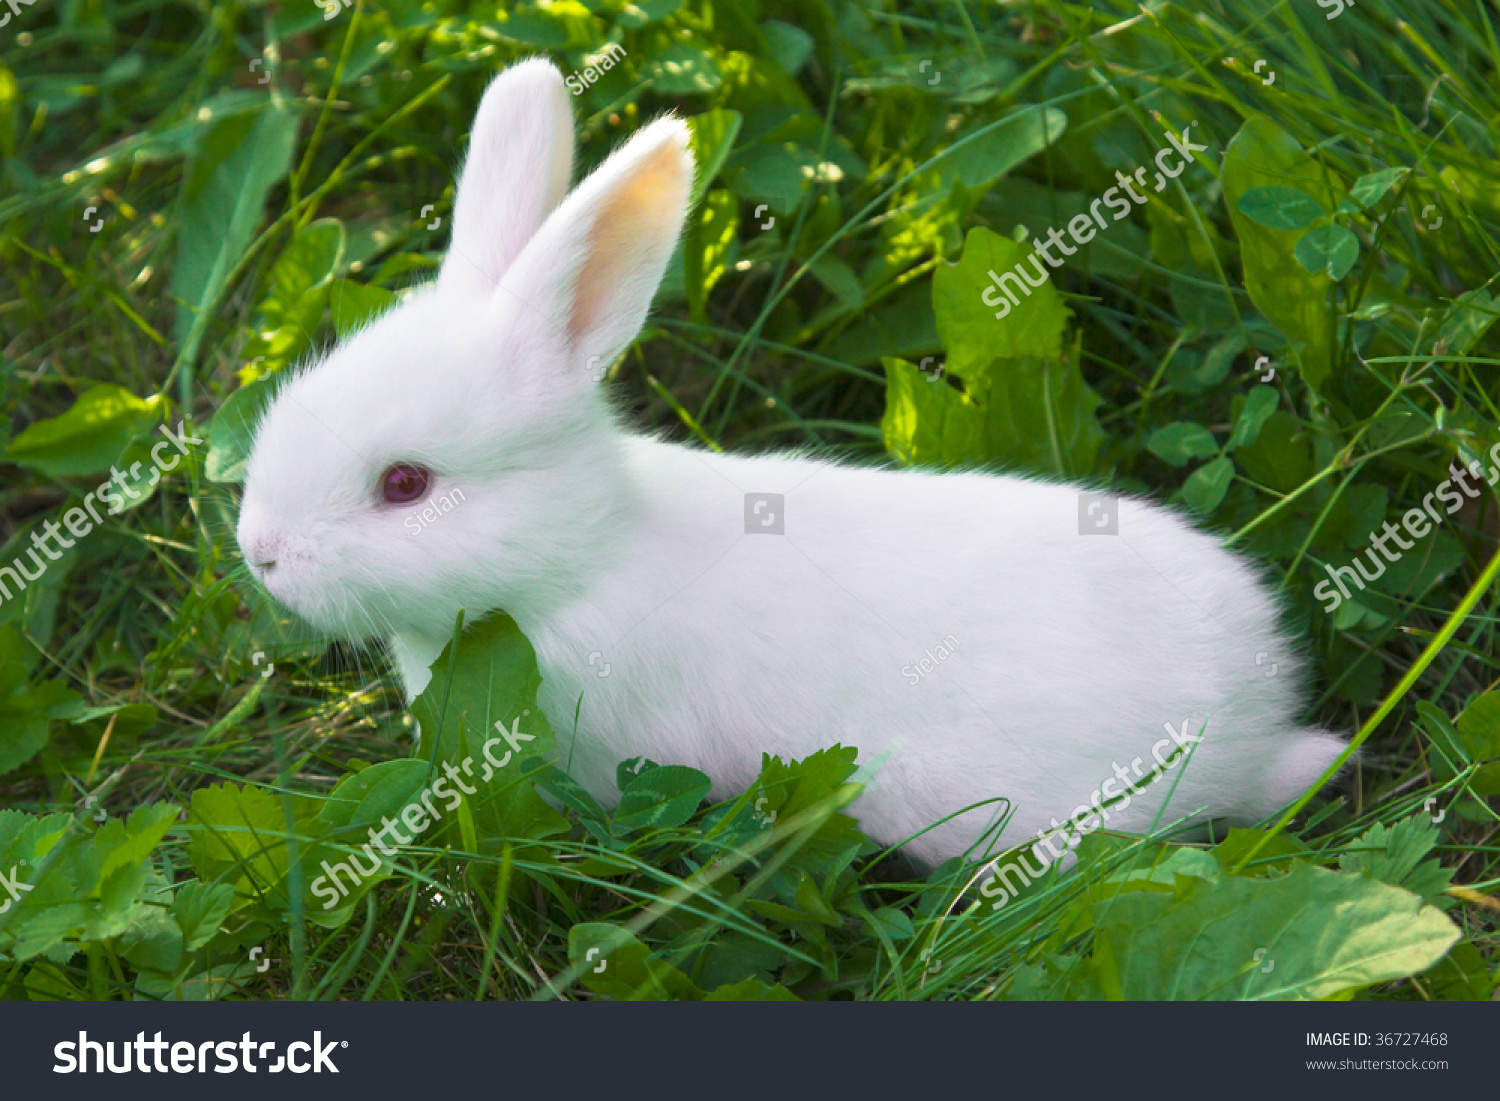 Small White Bunny (Rabbit) Sitting In A Grass On A Pasture Stock Photo ...